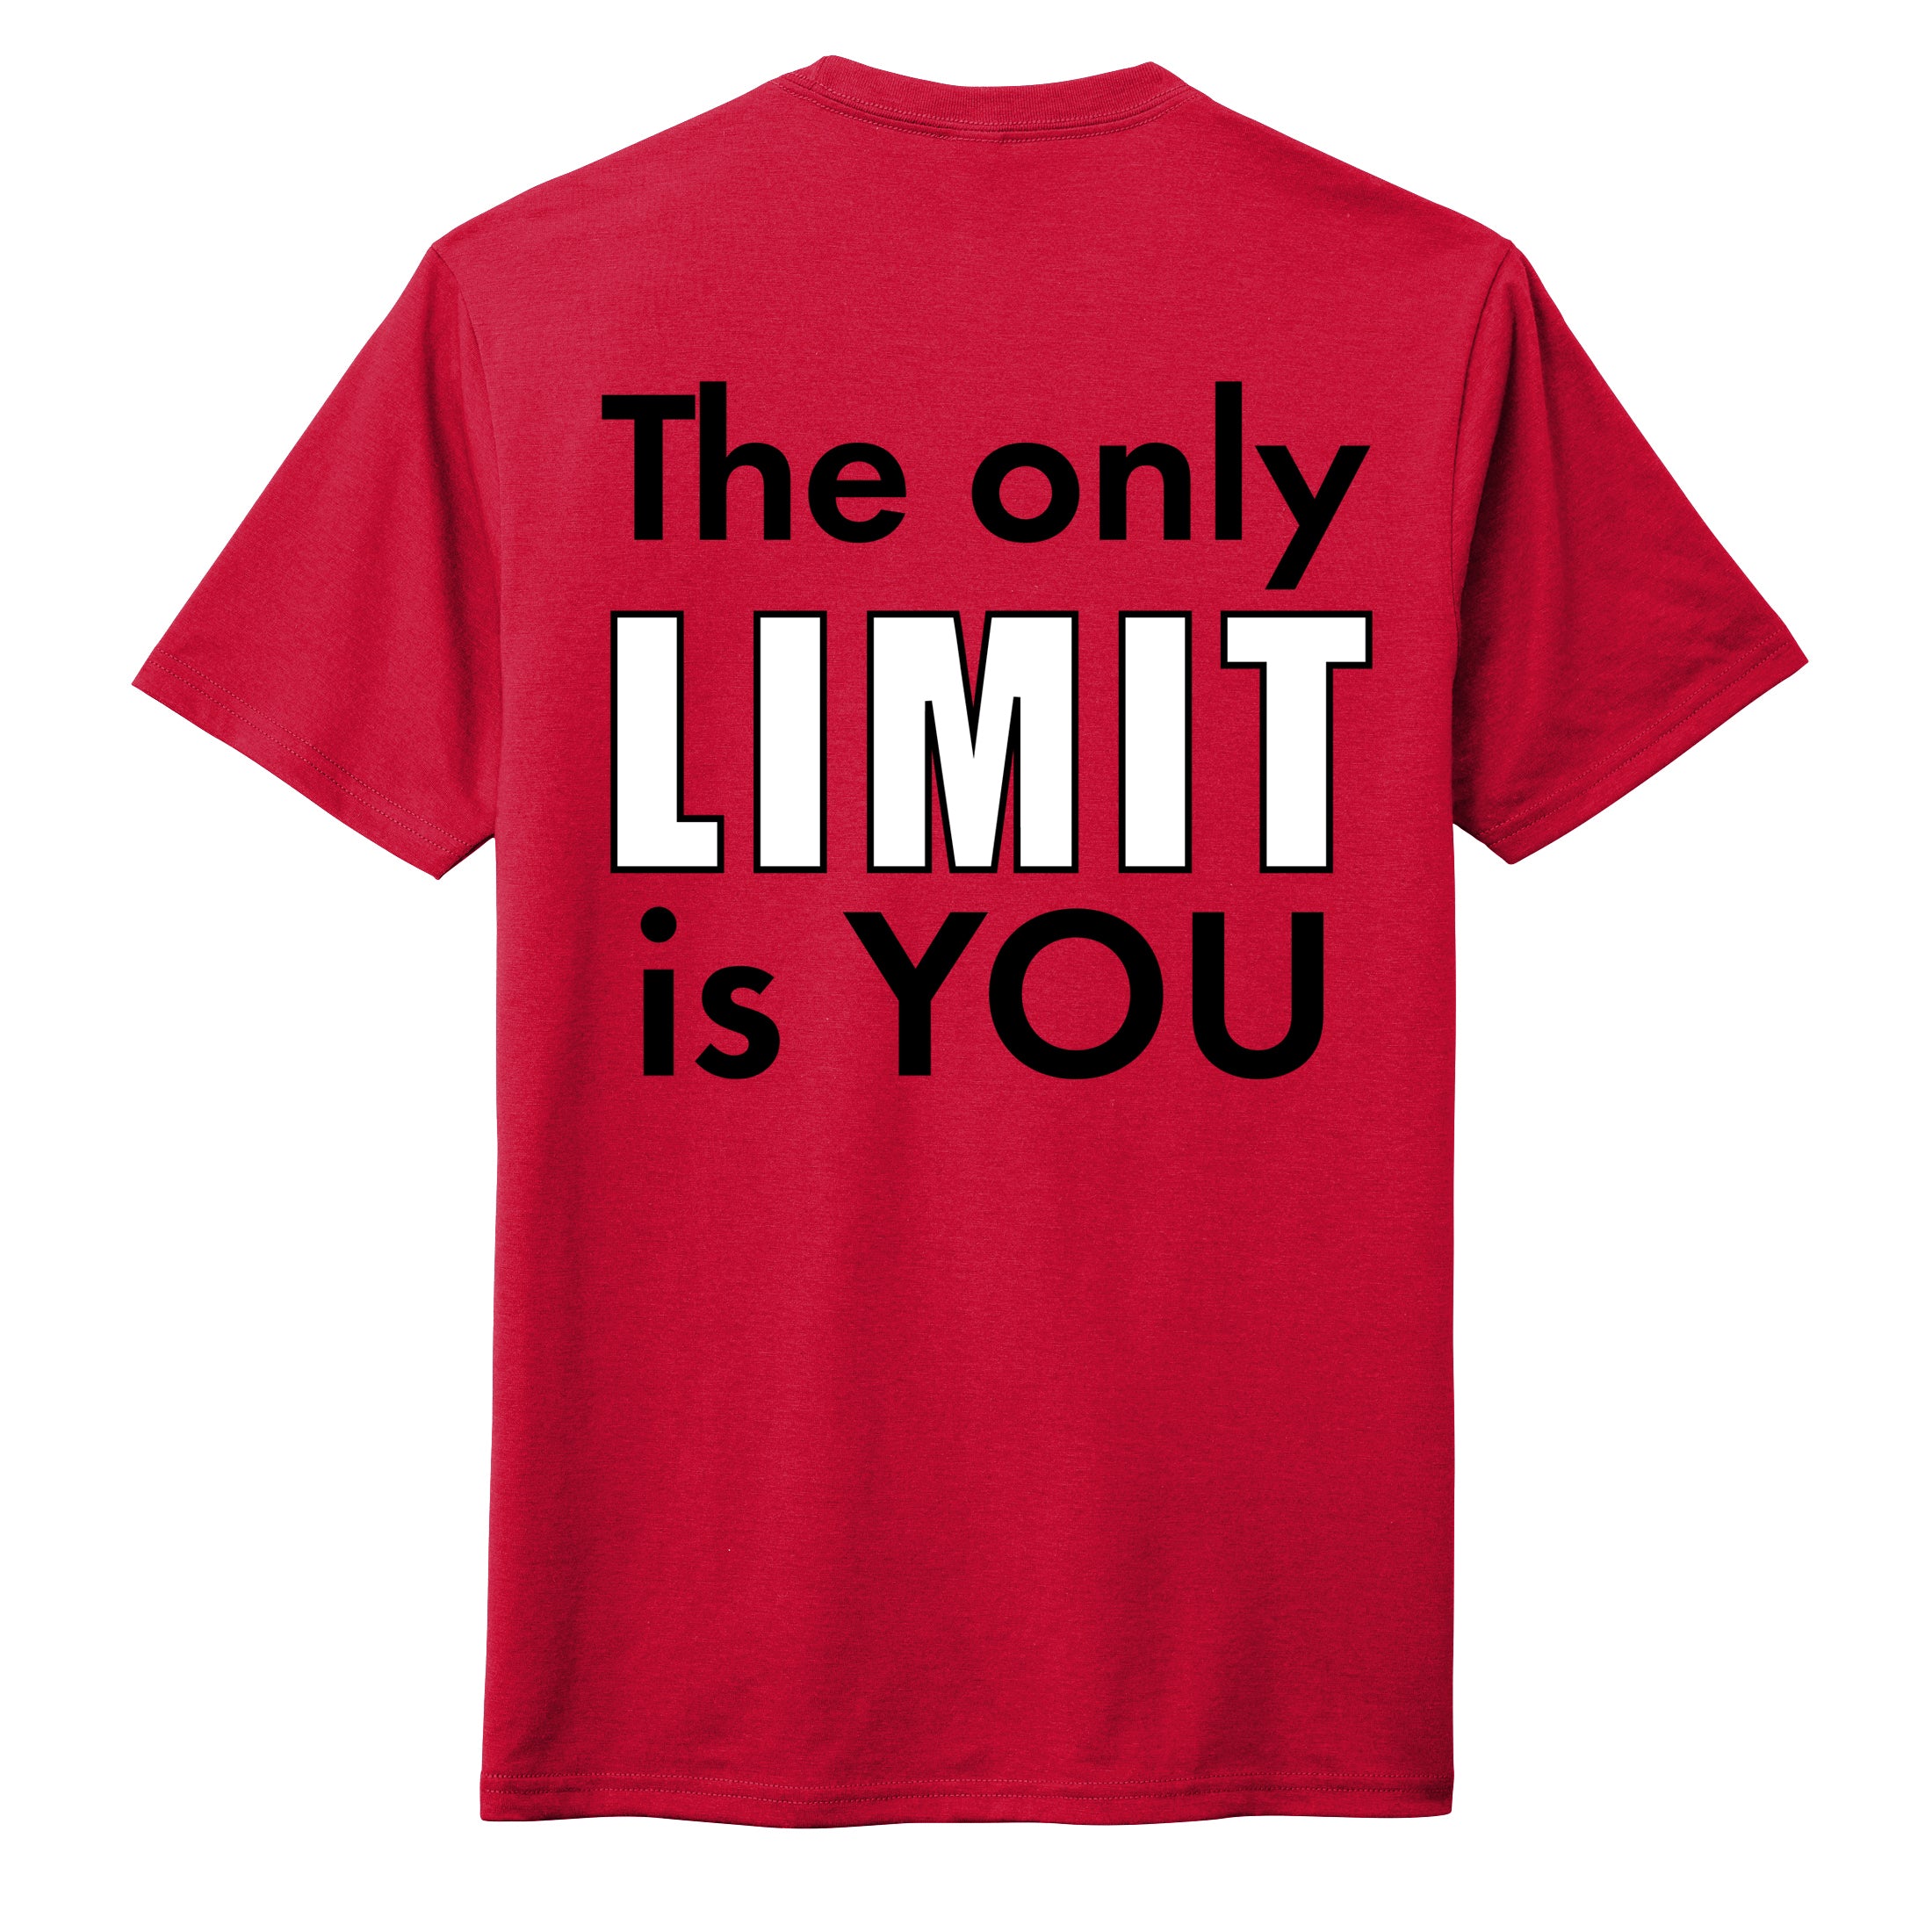 "The Only Limit is You" T-Shirt- Benefitting the American Diabetes Association